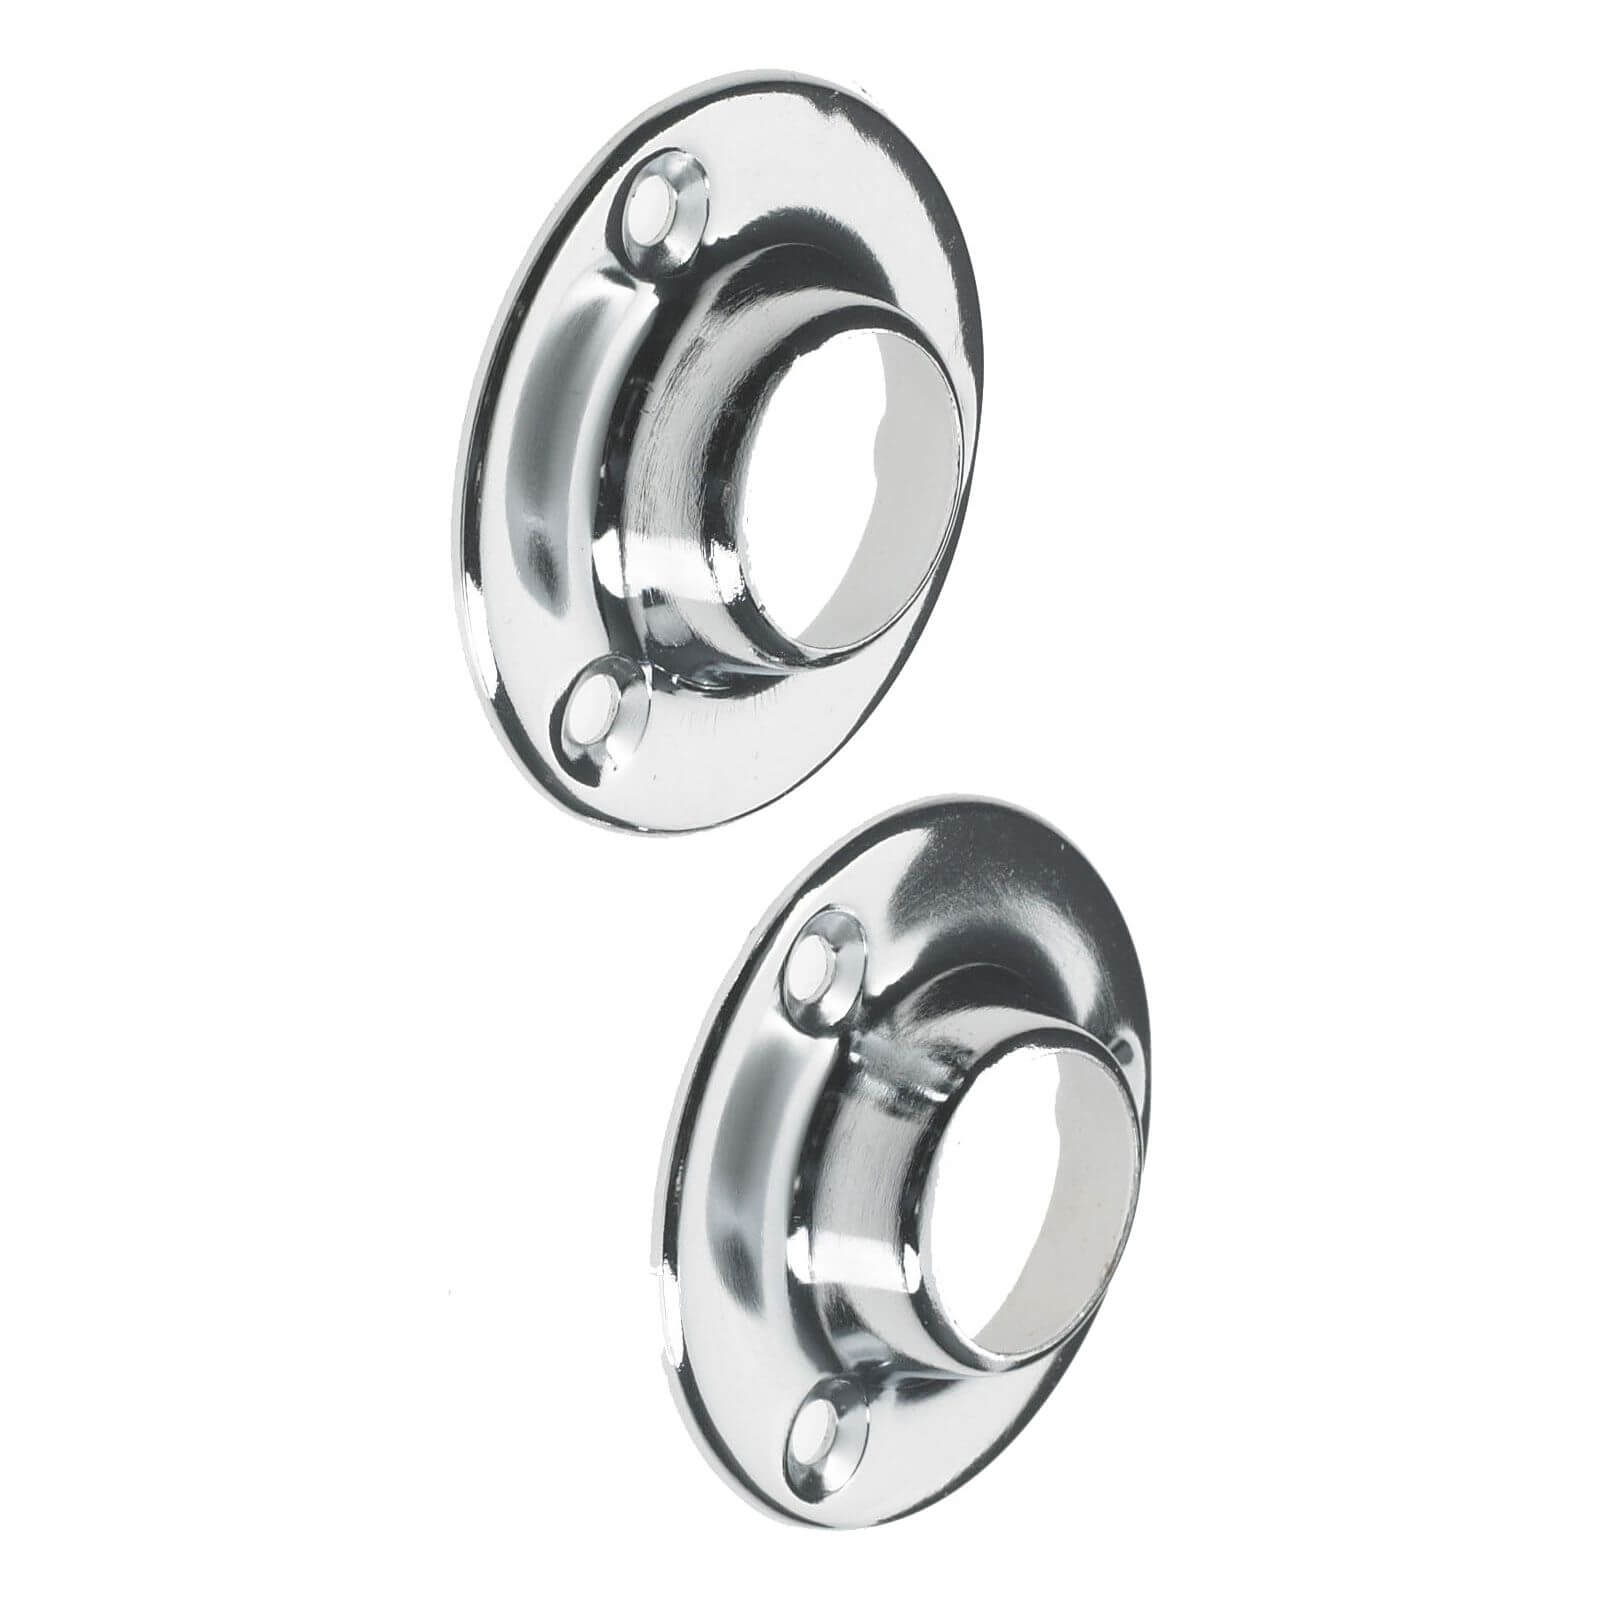 Deluxe Sockets - Chrome Plated - 19mm